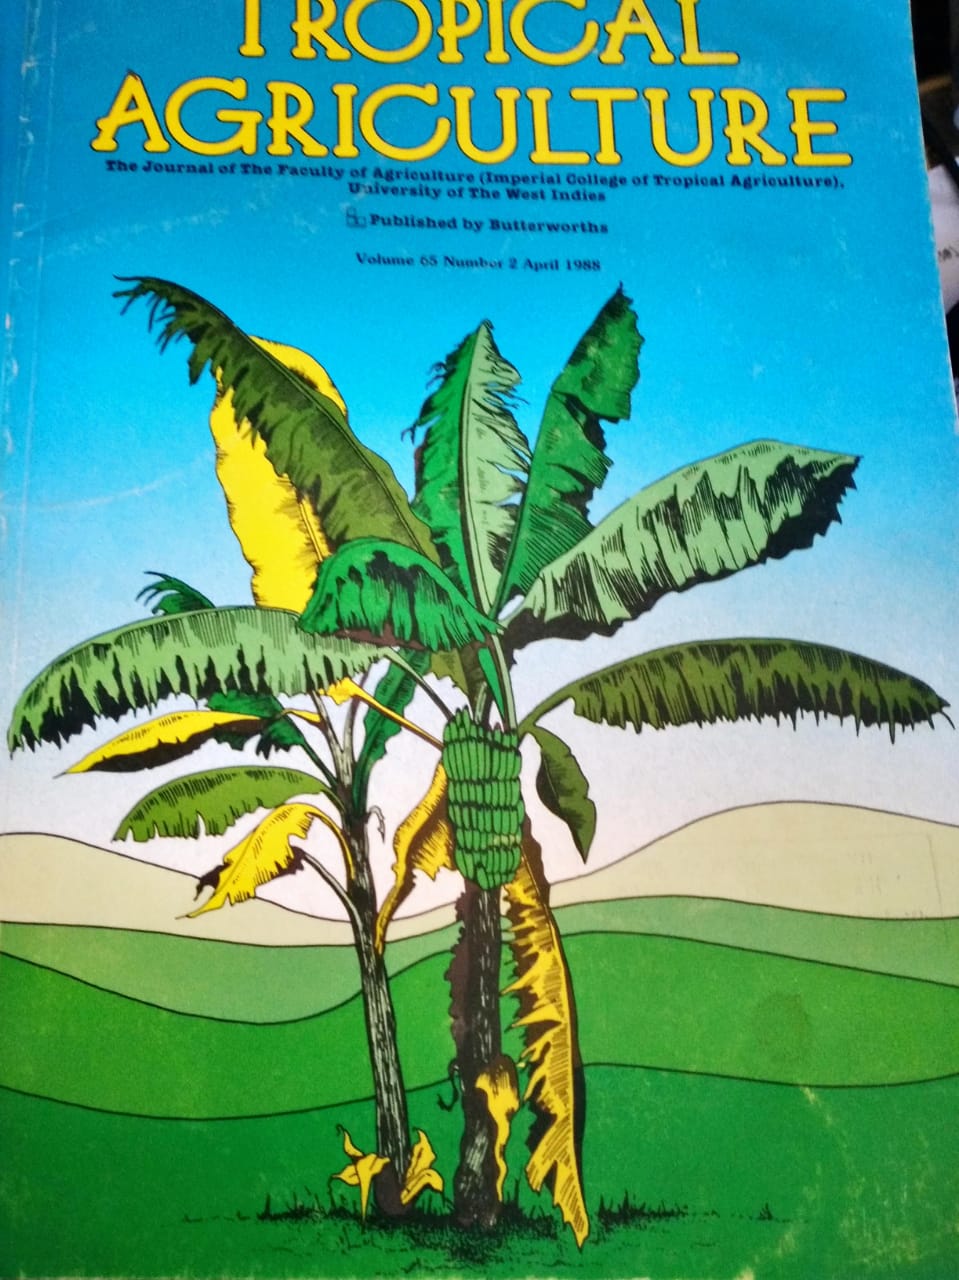 TROPICAL AGRICULTURE. THE JOURNAL OF THE FACULTY OF AGRICULTURE (IMPERIAL COLLEGE OF TROPICAL AGRICULTURE), UNIVERSITY OF THE WEST INDIES. VOL. 65 (2), APRIL 1988